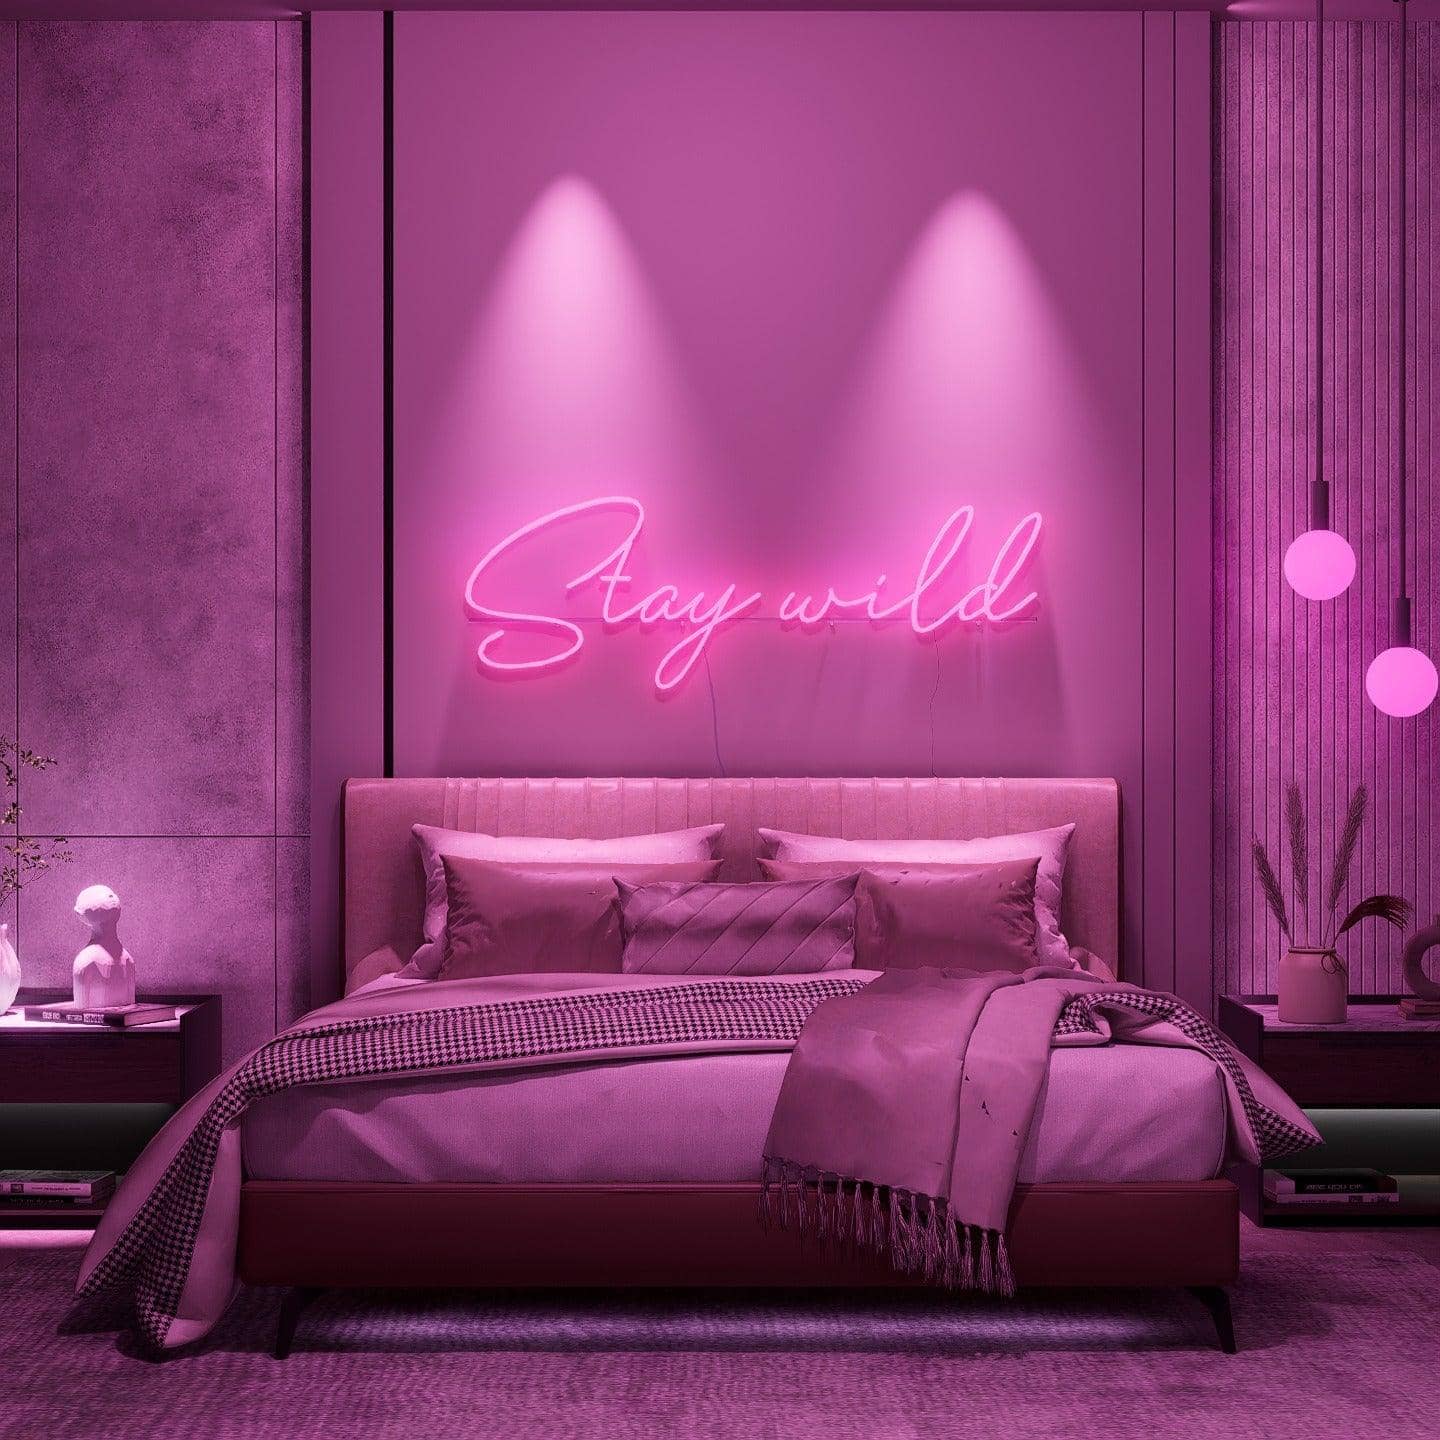 dark-night-lit-pink-neon-lights-hanging-on-the-wall-for-display-stay-wild